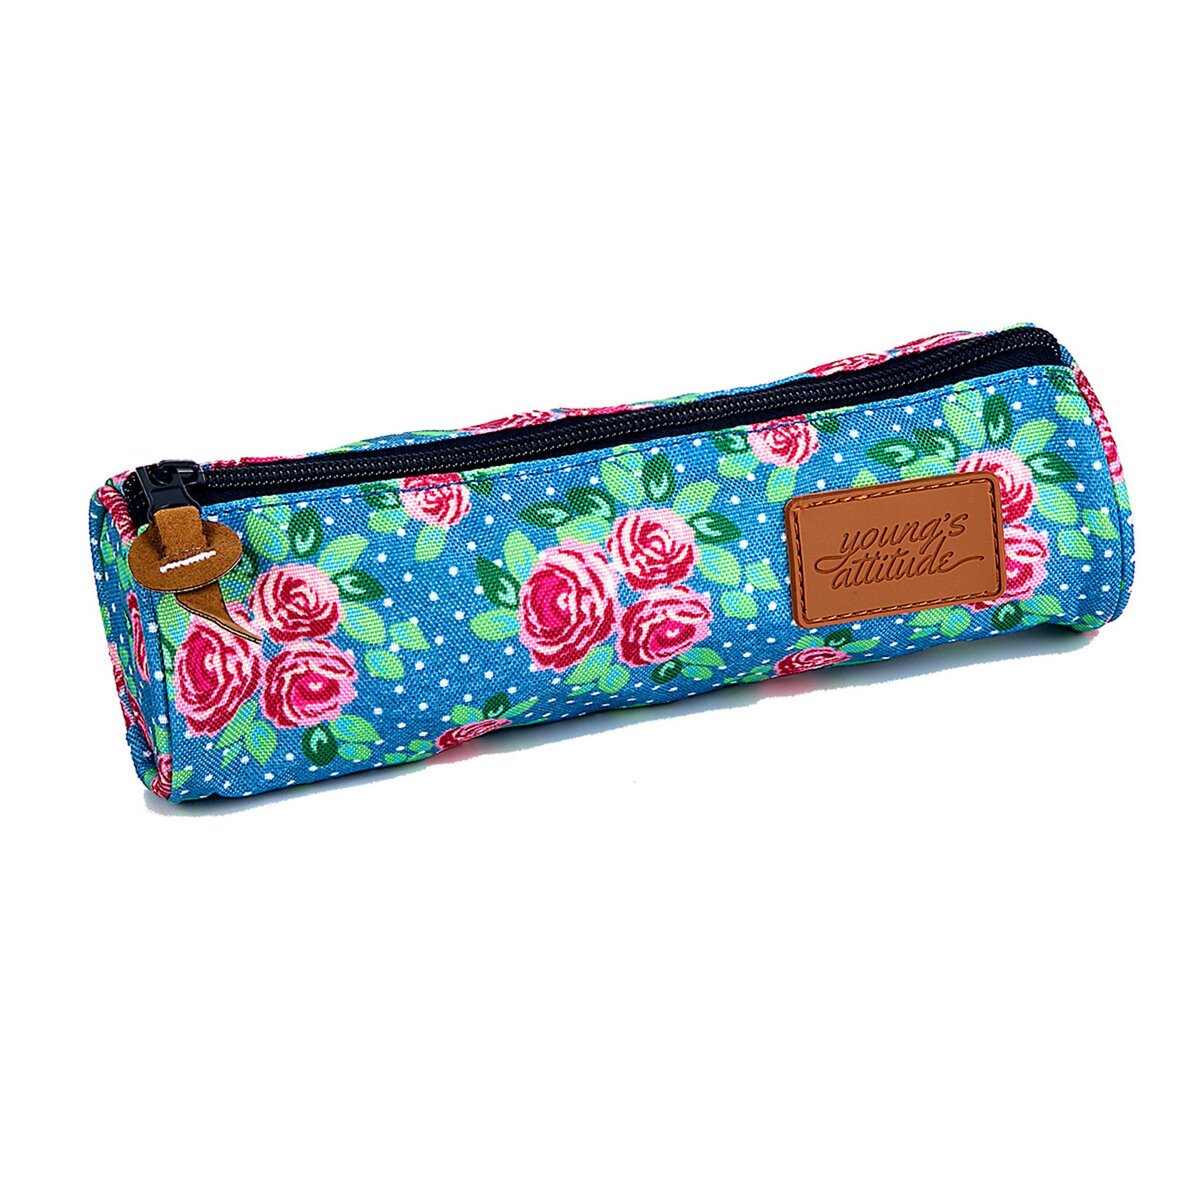 YOUNG ATTITUDE Trousse Young Attitude - ROND FLOWER